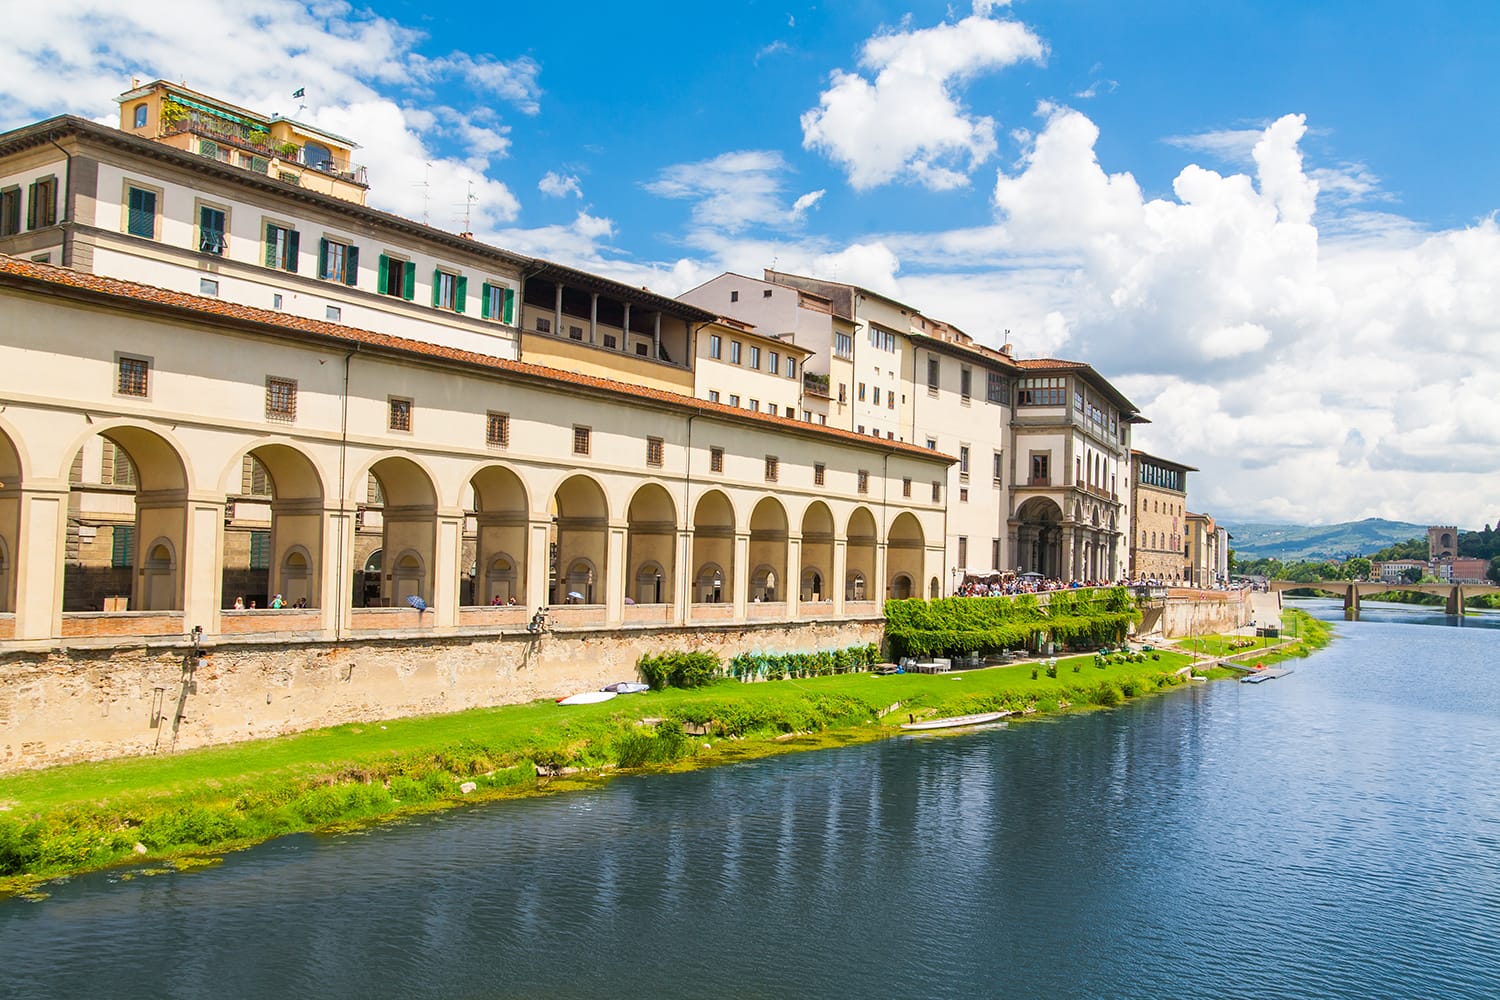 The embankment of river Arno. View of the Uffizi Gallery. Italy, Florence